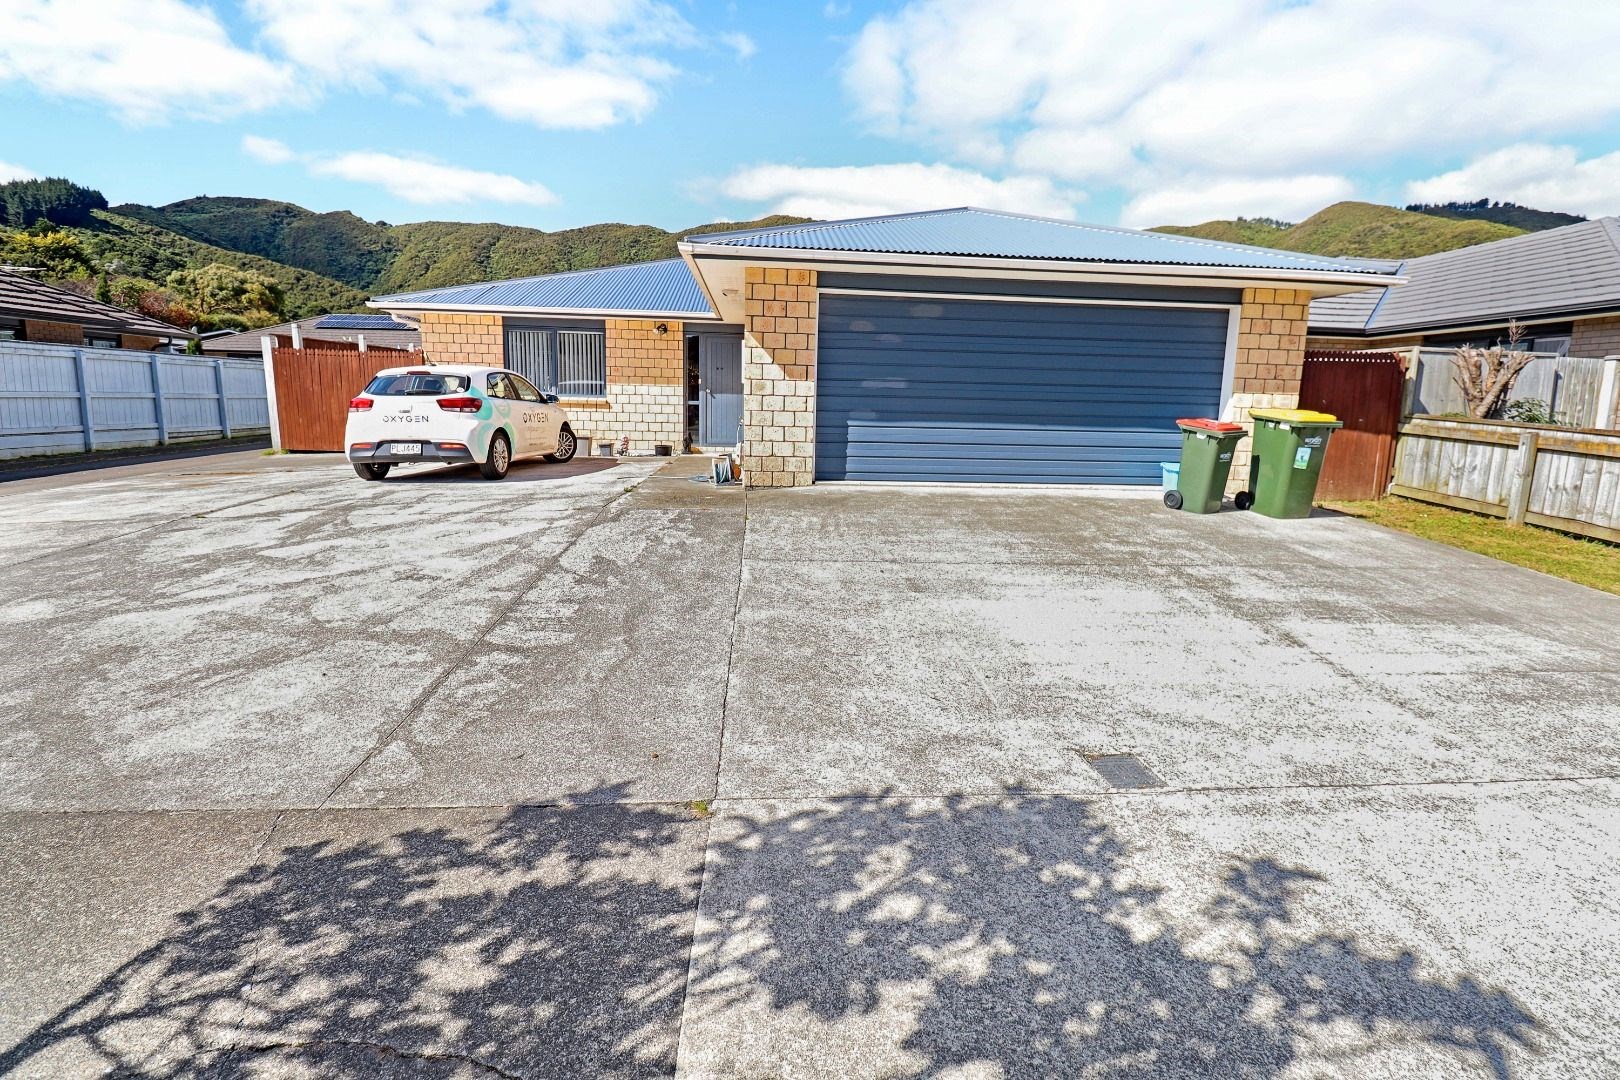 Real Estate For Rent Houses & Apartments : Wainui Living